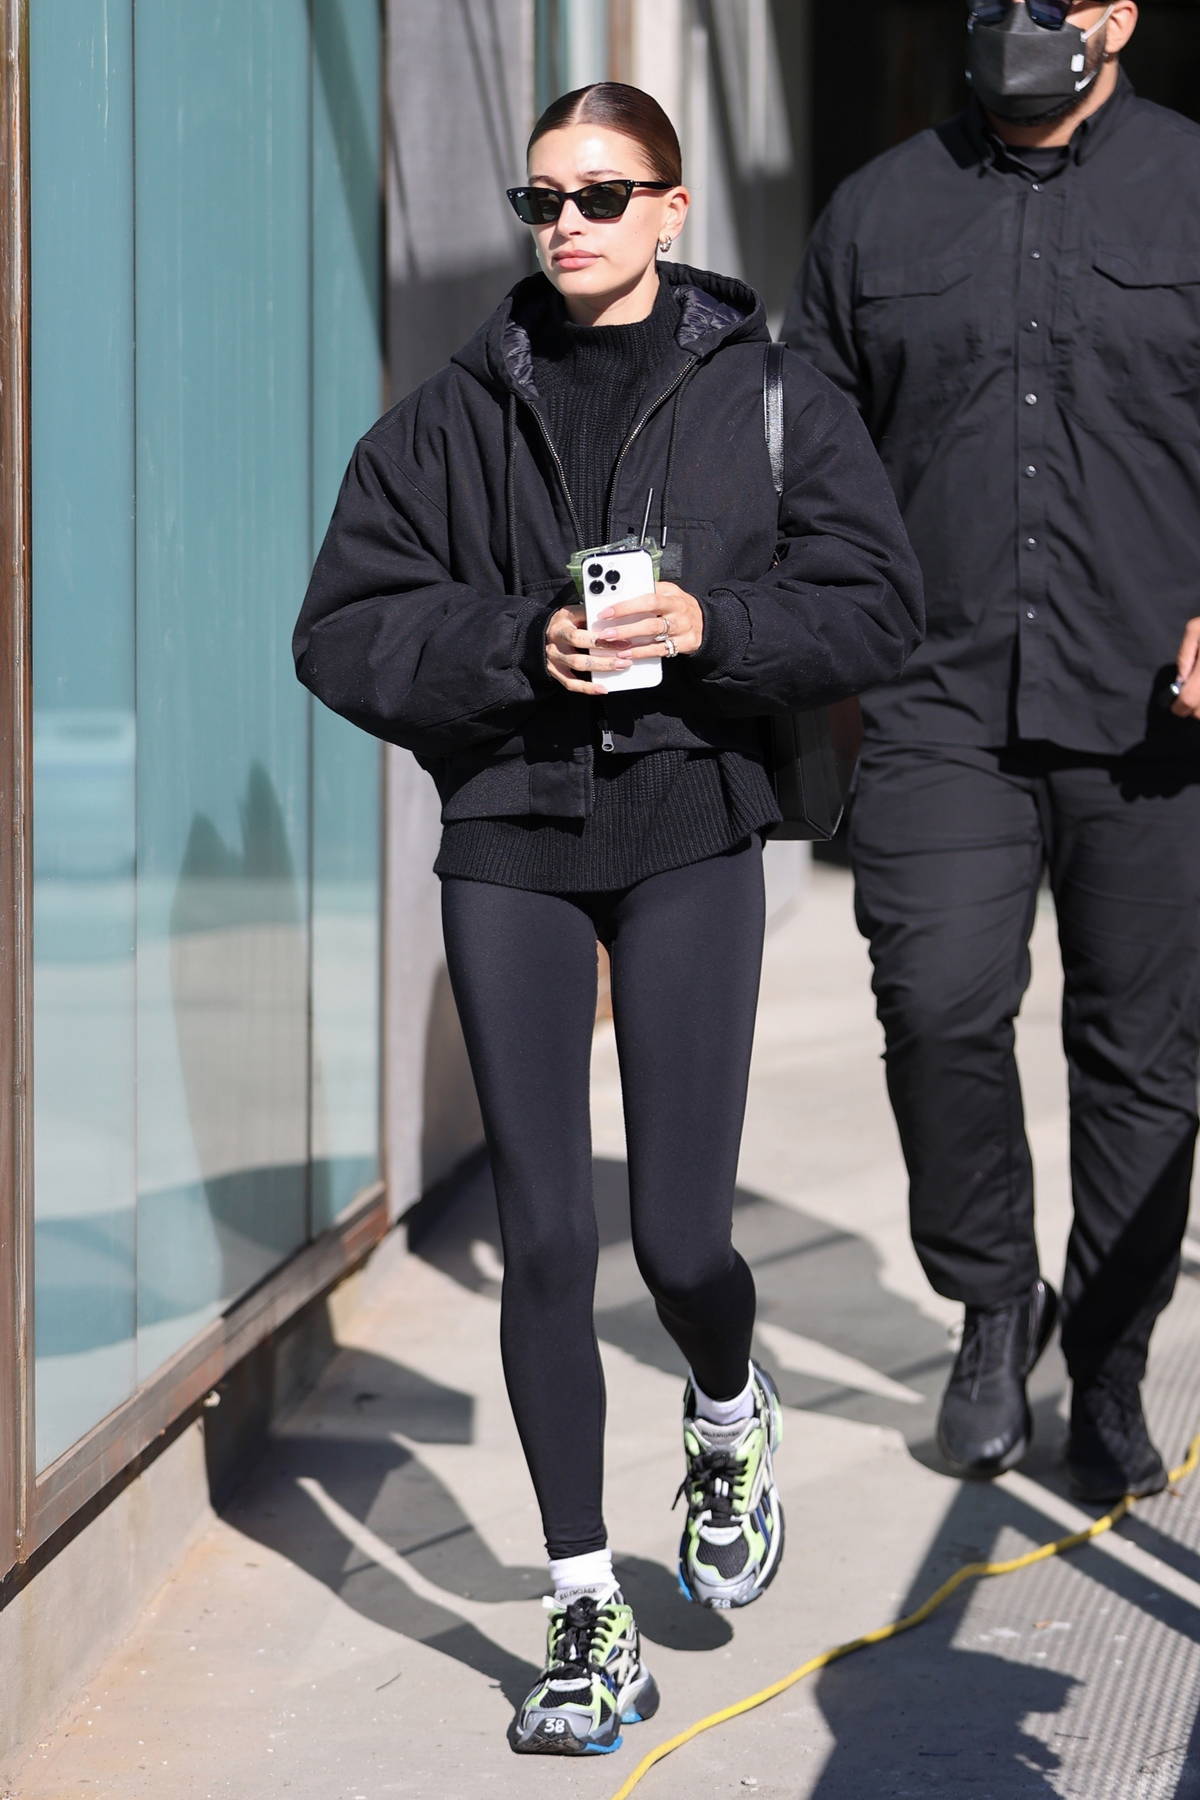 Sara Sampaio flashes her abs in cropped sweatshirt and leggings while  heading to a Pilates class